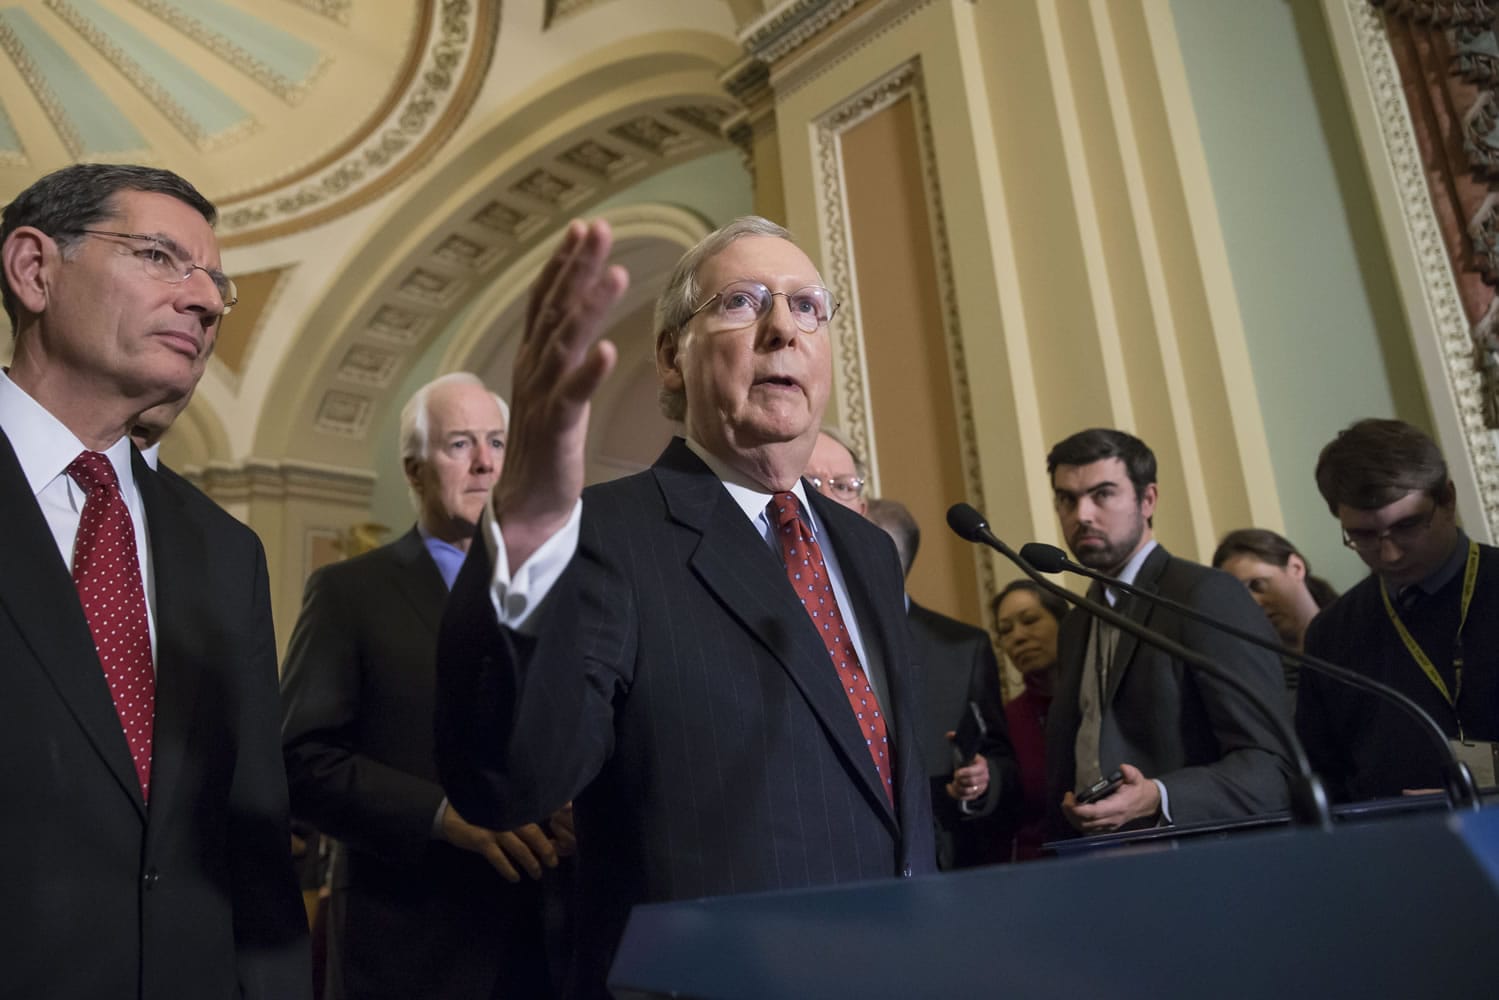 Senate Majority Leader Mitch McConnell, R-Ky., joined by Sen. John Barrasso, R-Wyo., far left, and Senate Majority Whip John Cornyn, R-Texas, left rear, talks to reporters about the Friday night deadline for funding the government, on Capitol Hill in Washington, Tuesday, Dec. 8, 2015. McConnell, the top Republican in the Senate, also dismissed remarks yesterday by GOP  presidential hopeful Donald Trump about restricting Muslim travel to the United States. McConnell, without mentioning Trump by name, said those remarks are  ?completely and totally inconsistent with American values.&quot;   (AP Photo/J.